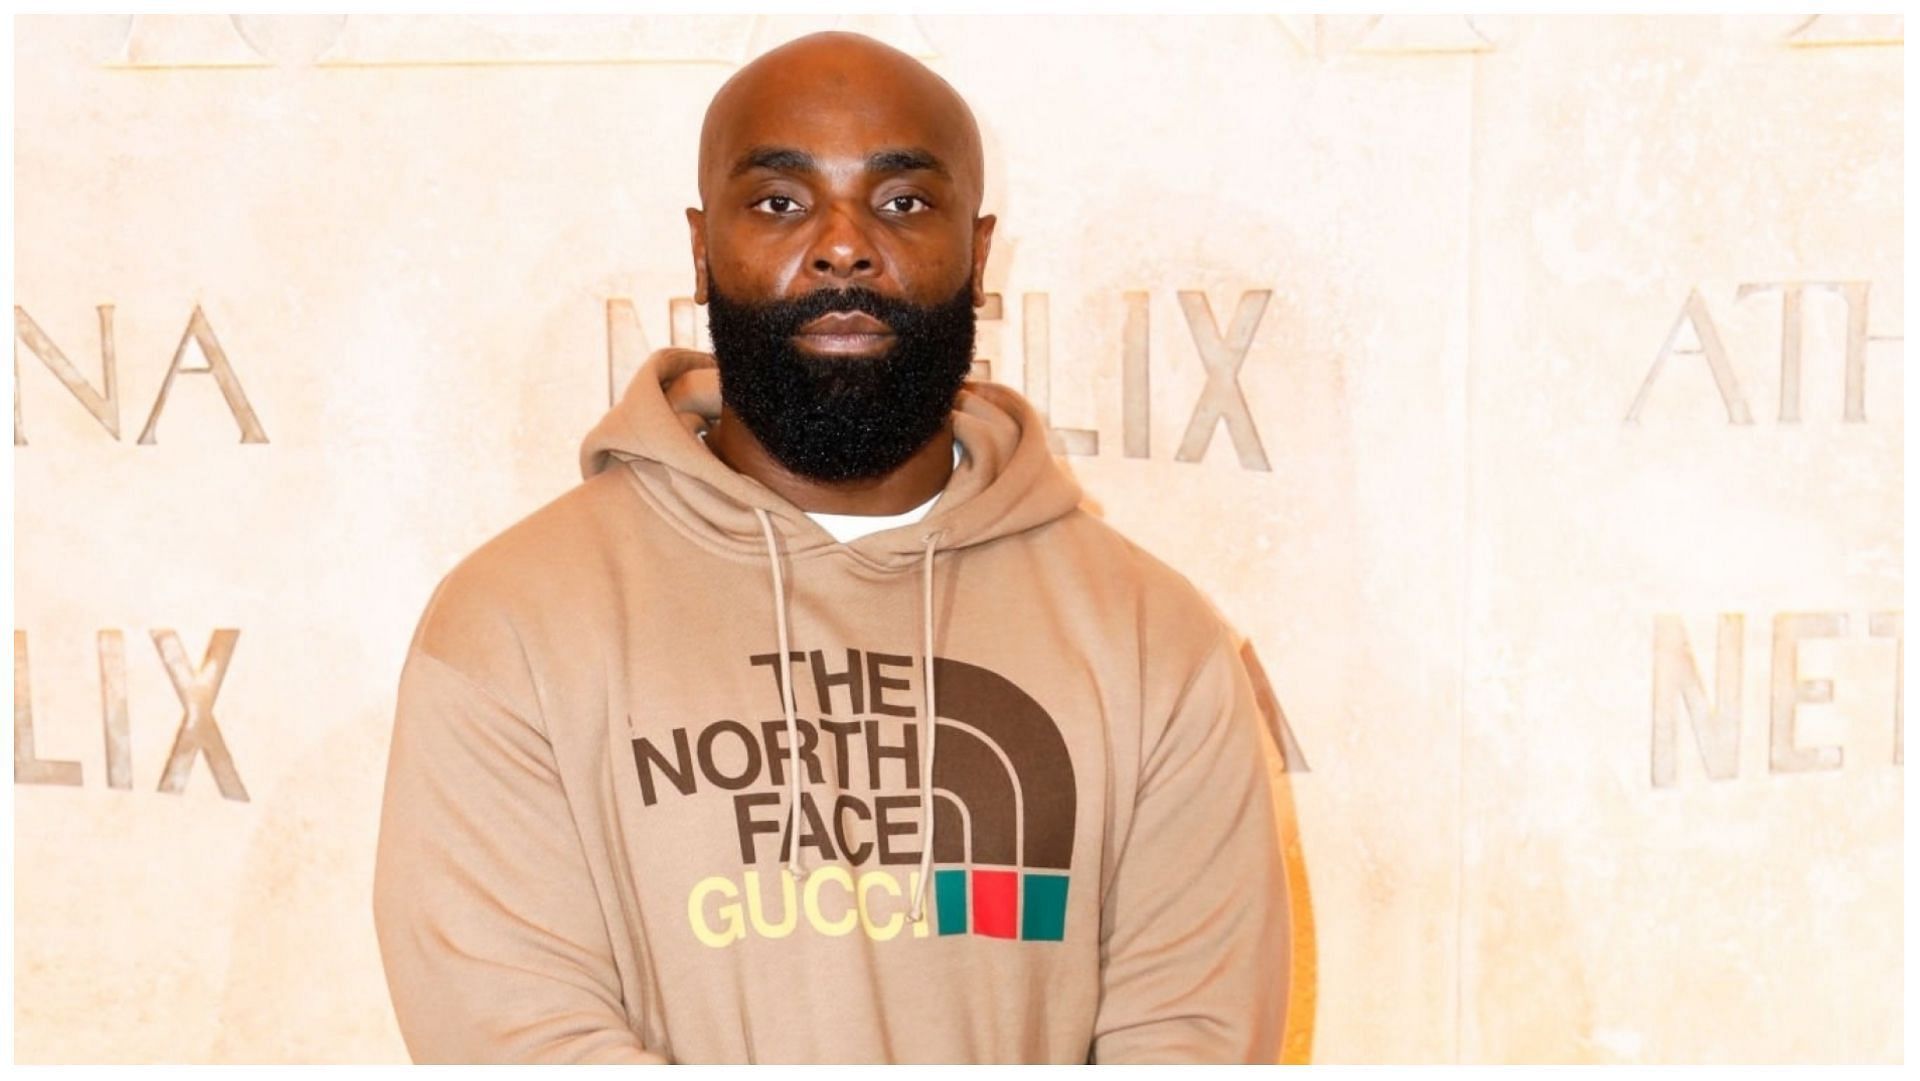 Kaaris was recently detained on domestic violence allegations (Image via Julien Hekimian/Getty Images)